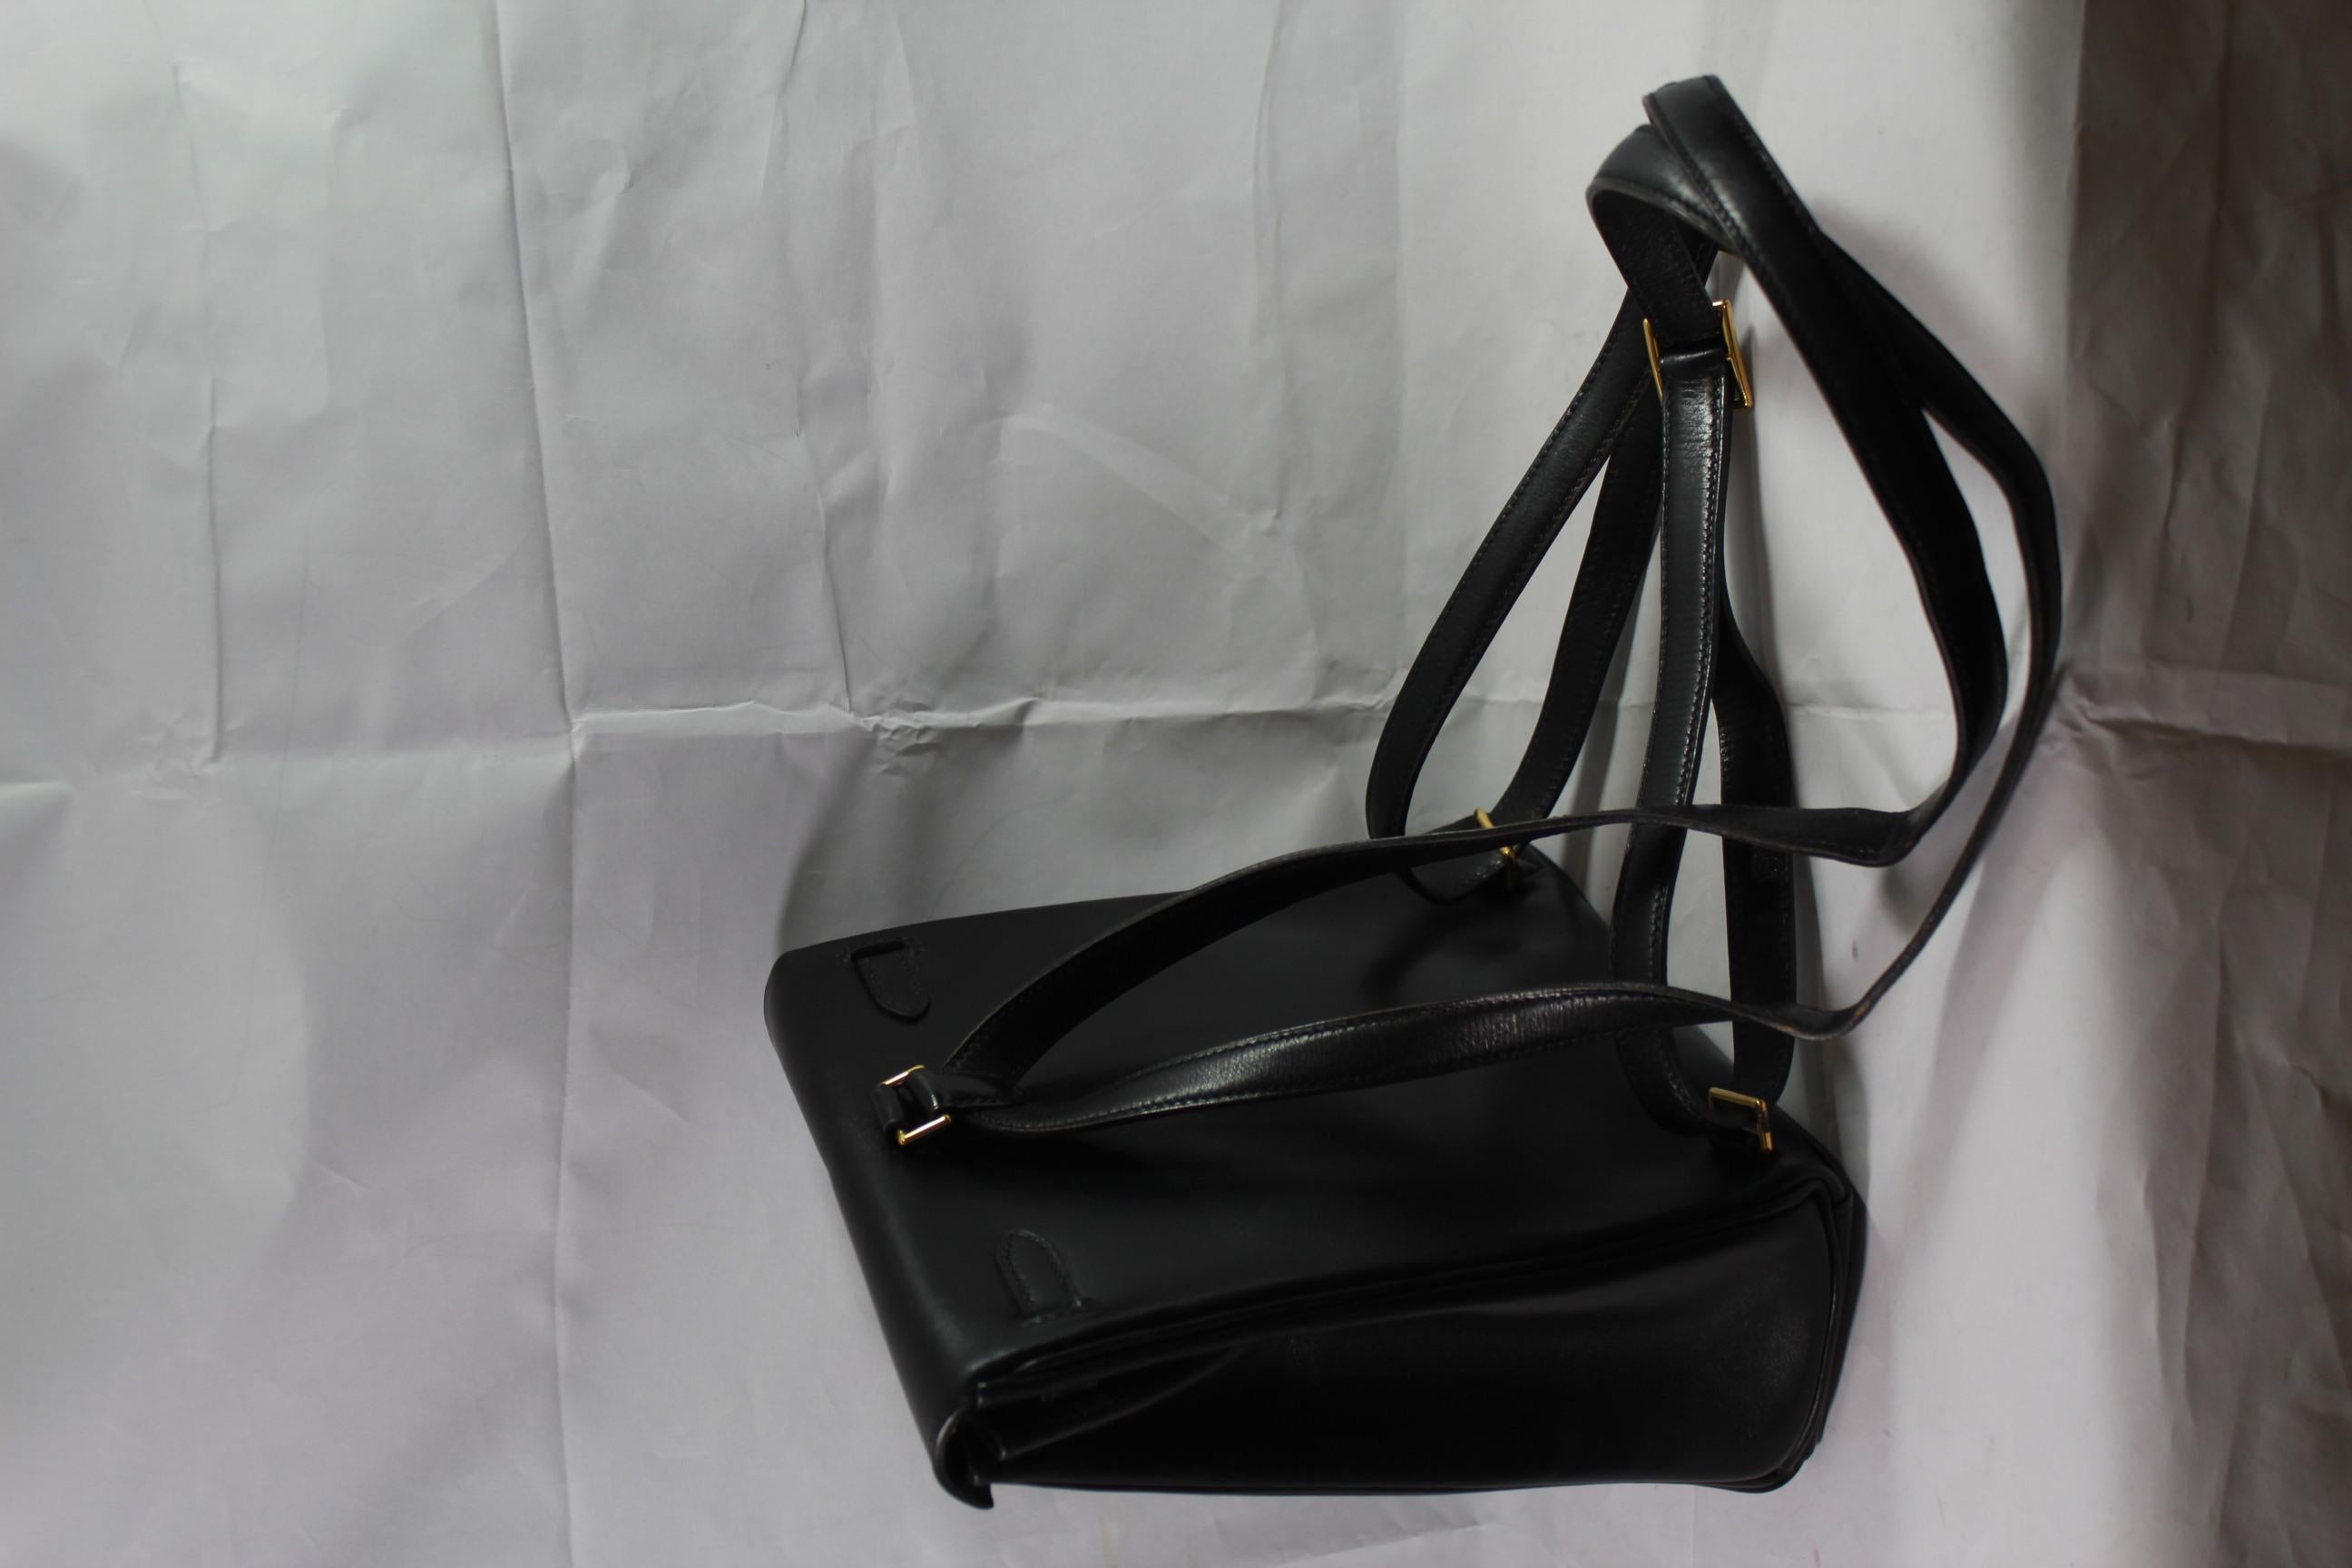 Extremly rare to find in vintage and totallly sold out in new Vintage Hermes Kelly backpakc in black box leather.

really good vintage condition, light signs of use but no major defect.

Handles and corner in relaly good condition.

Size 19*21 cm